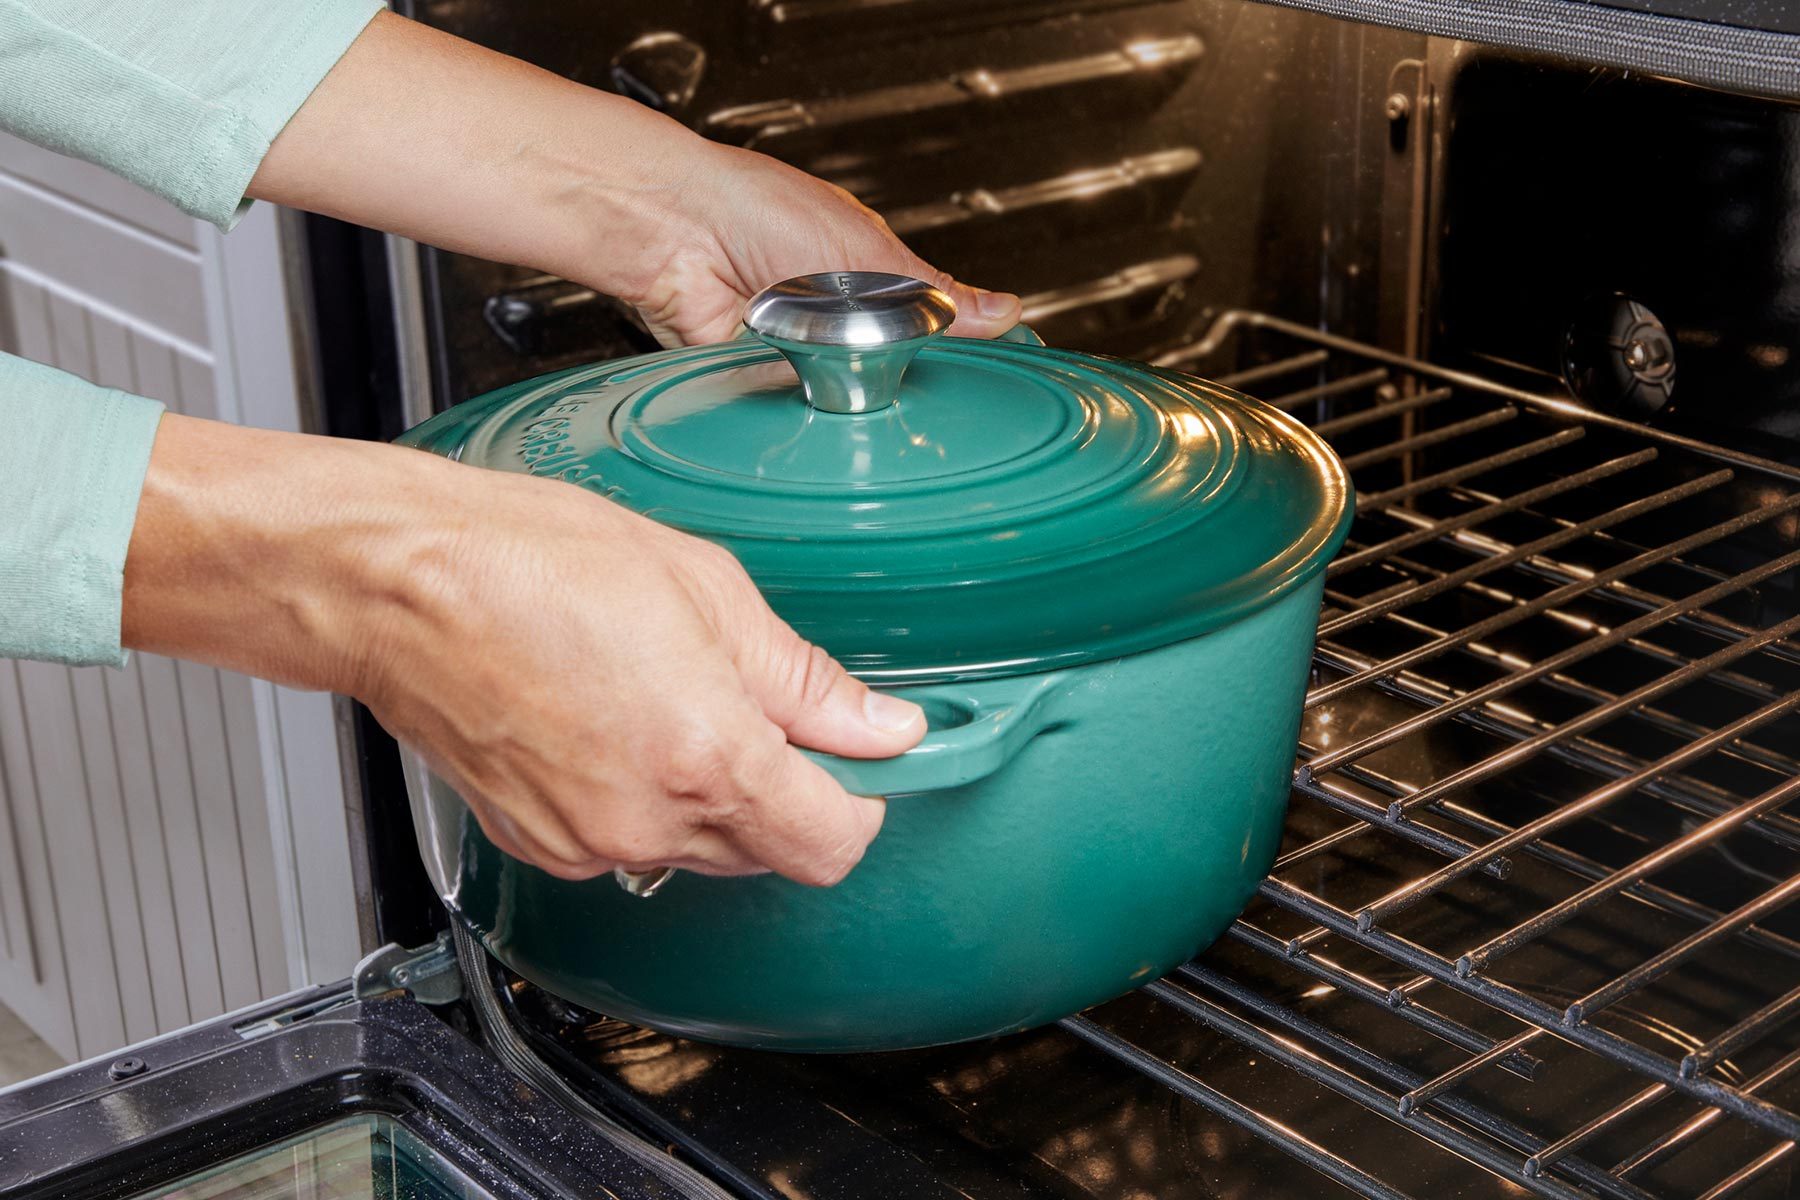 Le Creuset Dutch Oven Review: Yes, This Heirloom Is Worth the Splurge